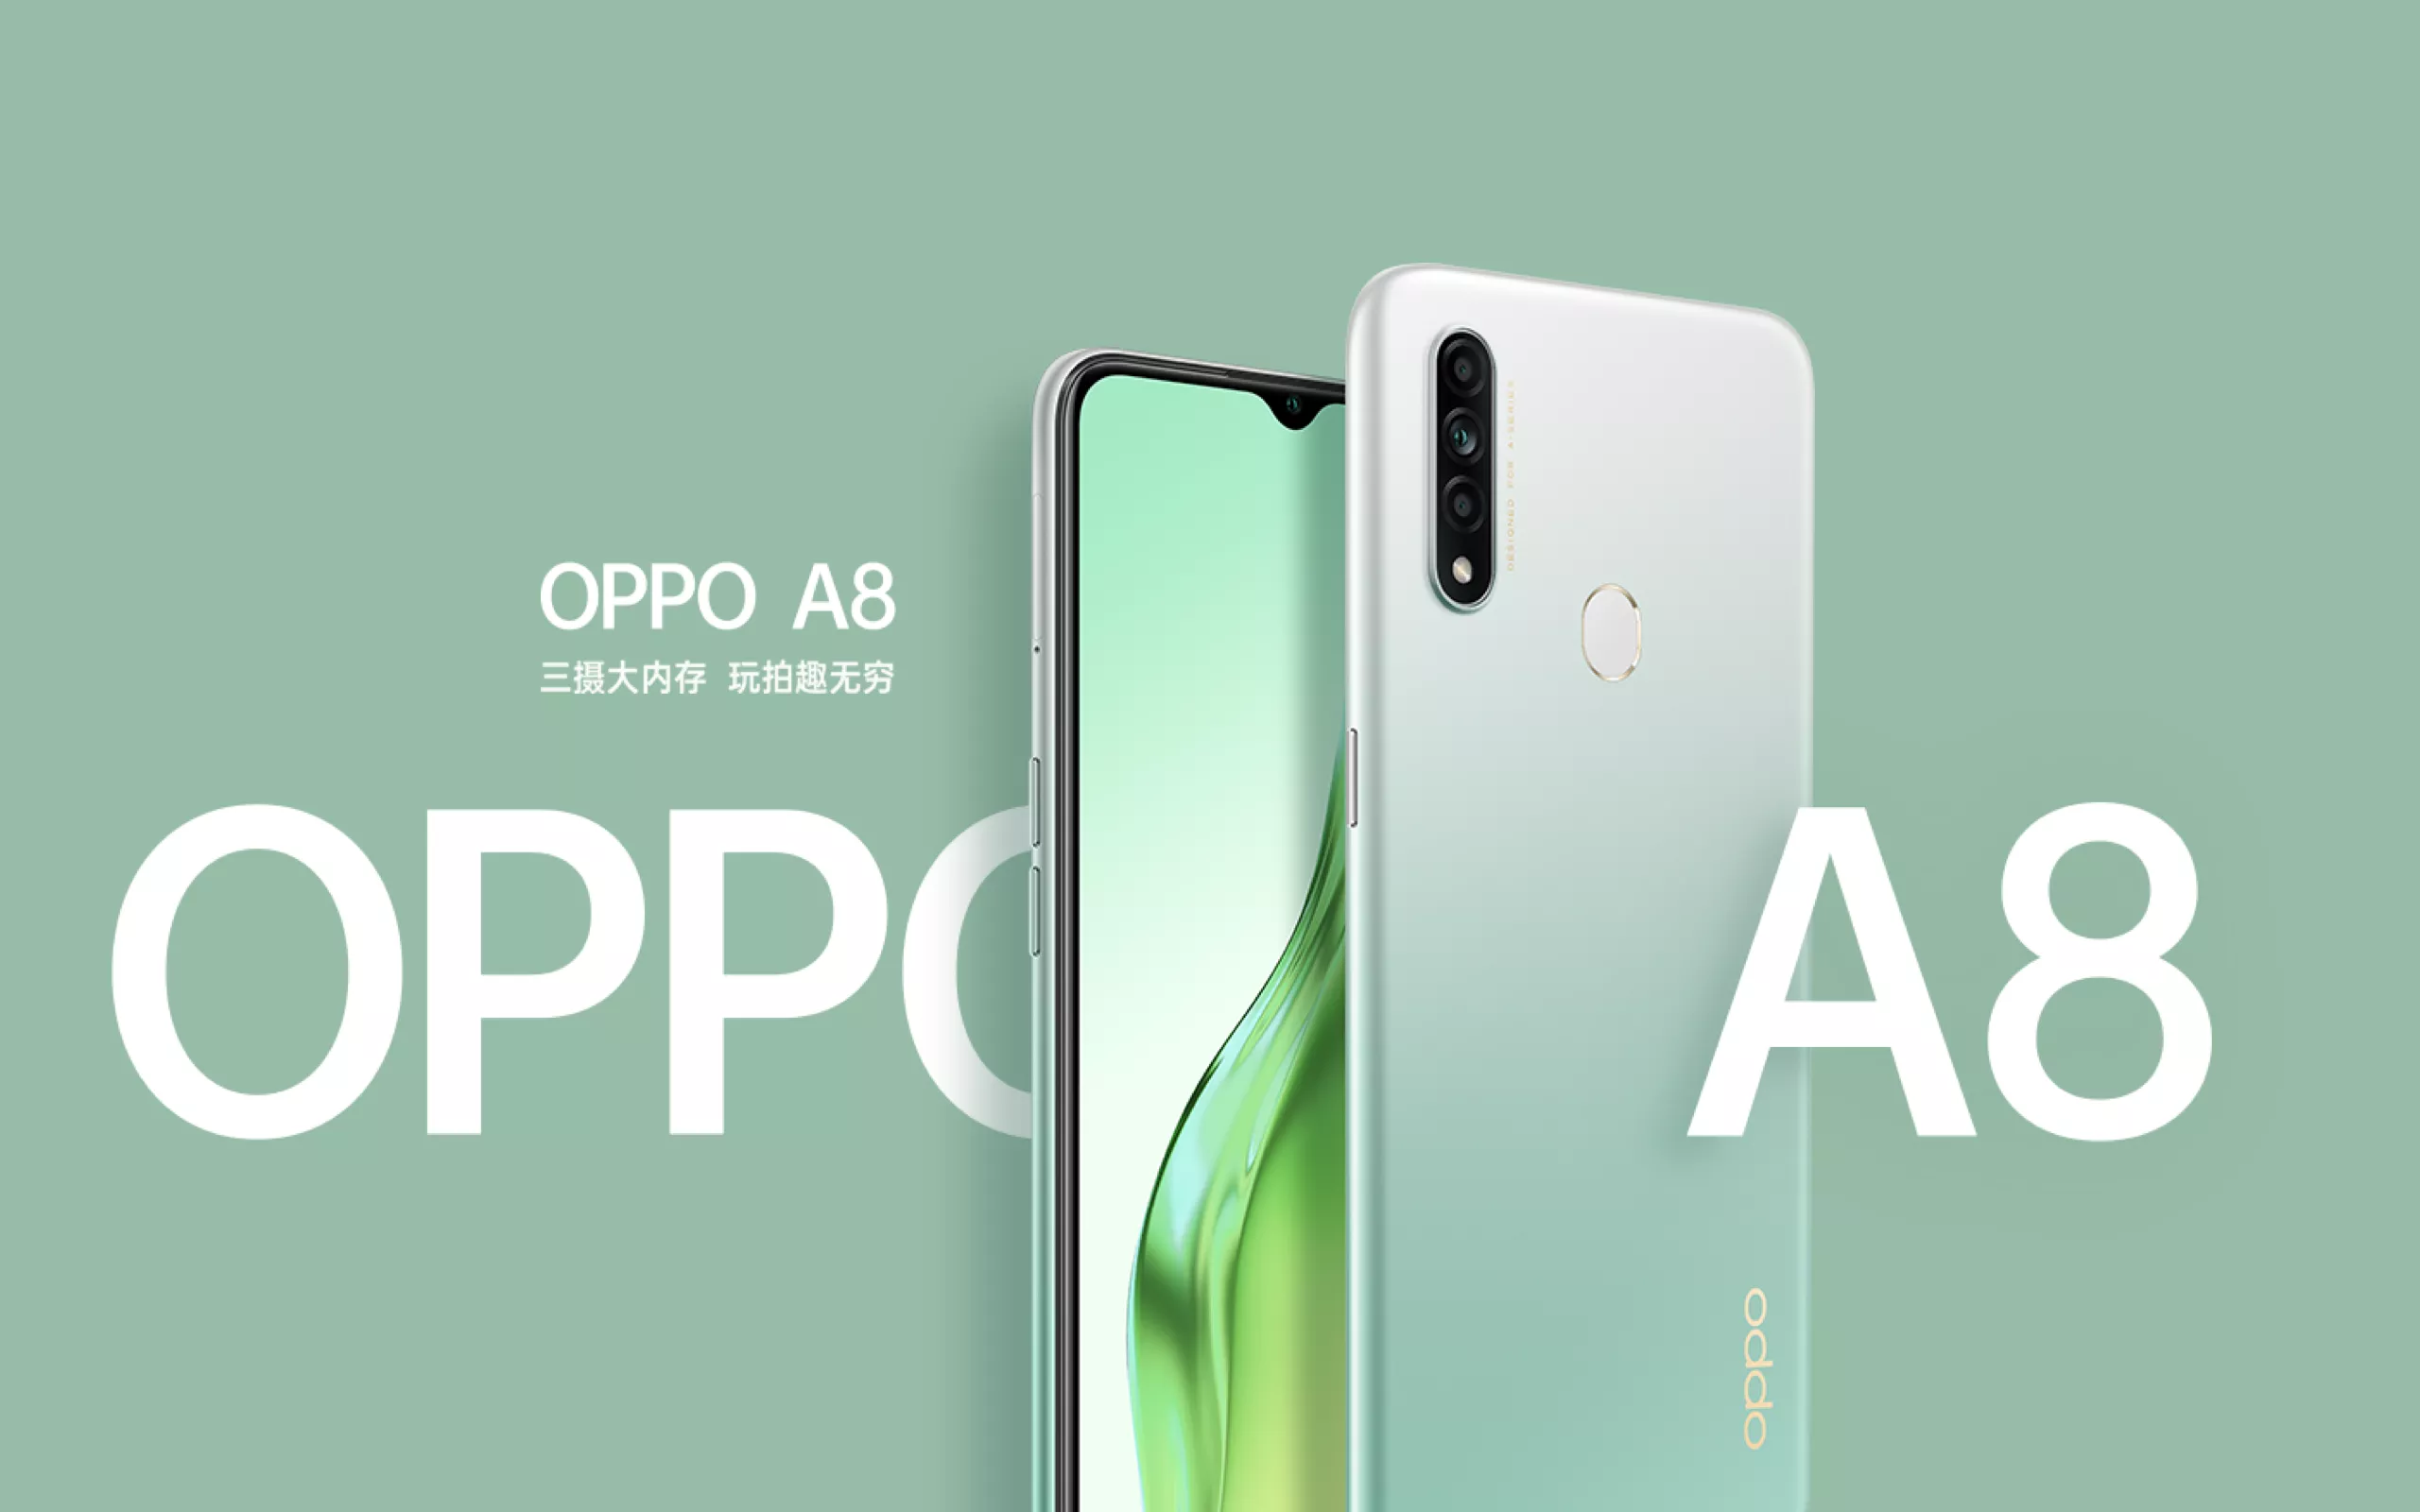 Review of the smartphone Oppo A8 with the main characteristics